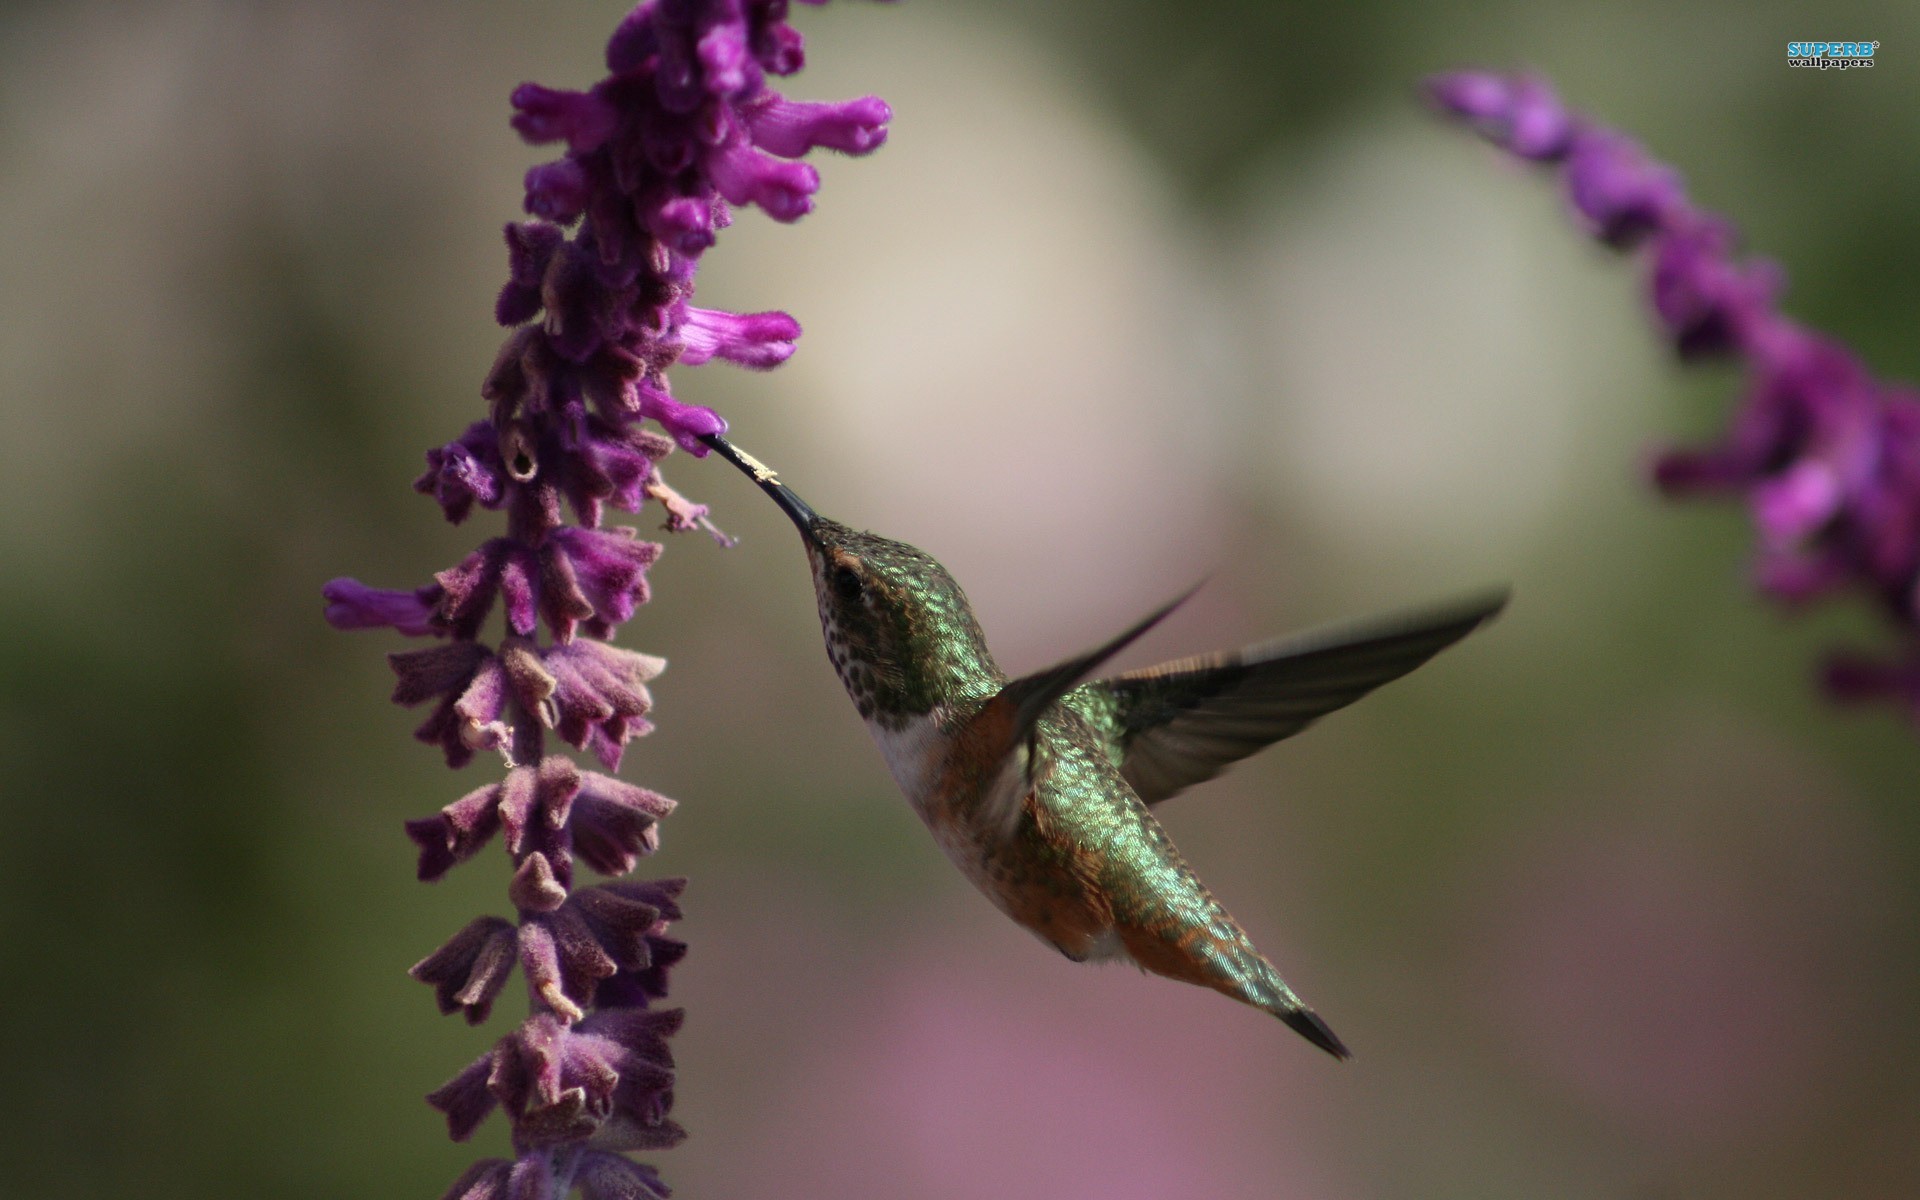 Following the click of the download button, right click on the image and select SAVE AS to complete your download. Filename : Hummingbird Wallpaper Abstract